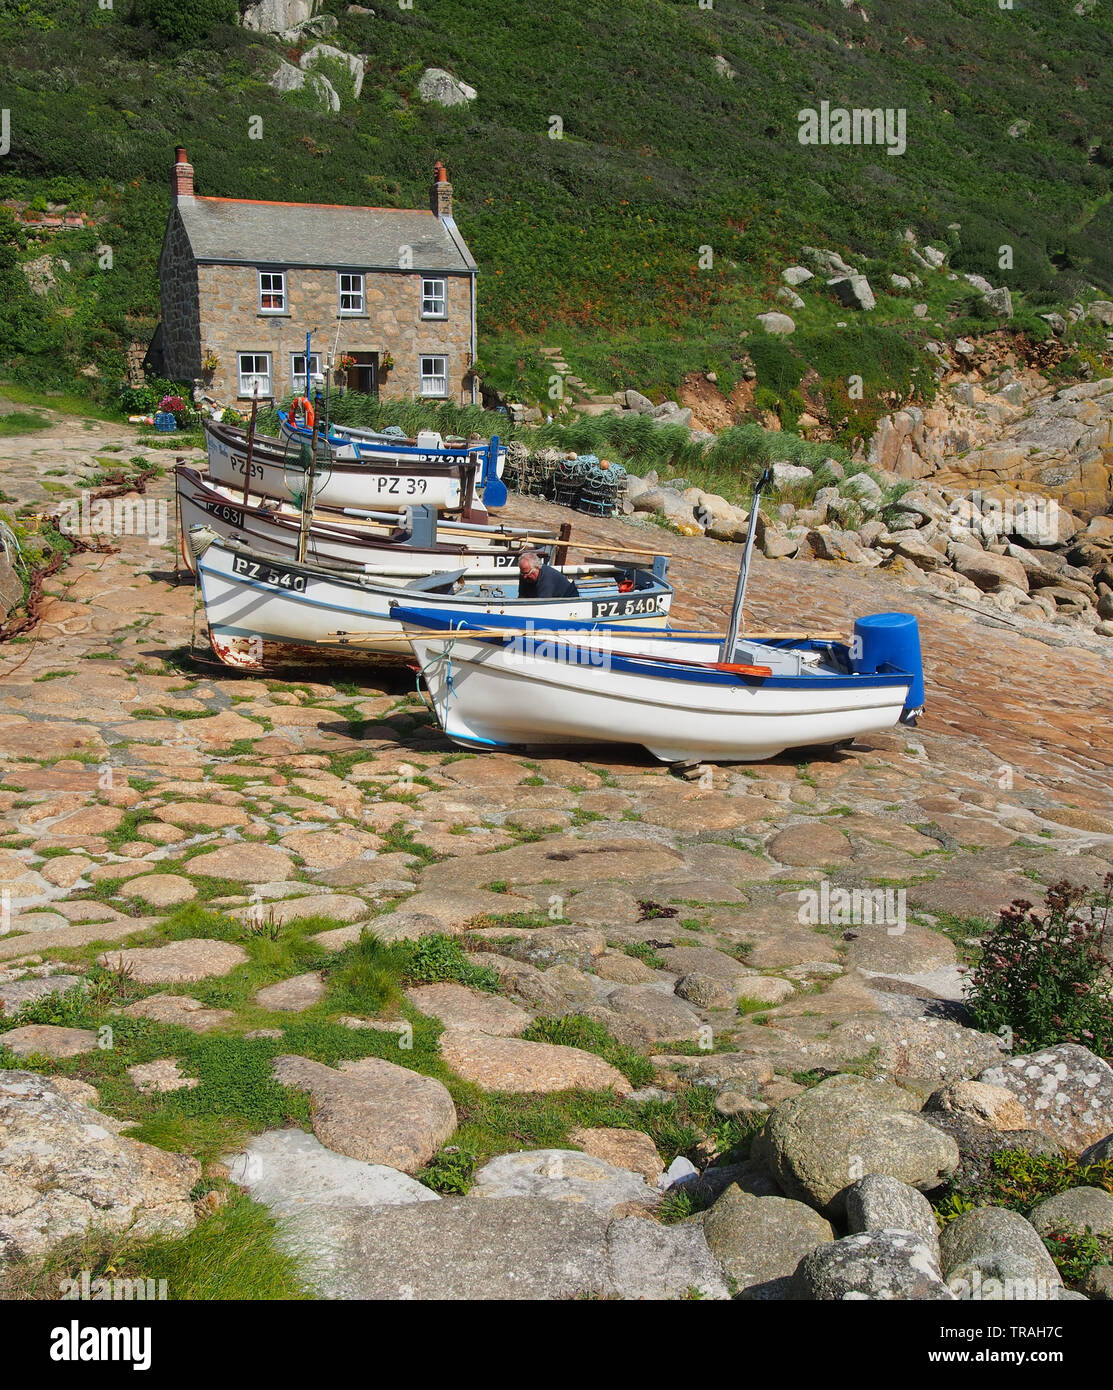 Typical Cornish cottage built on the quay at Penberth Cove on the Penwith Peninsula in west Cornwall, England, UK with fishing boats in the foreground. Stock Photo